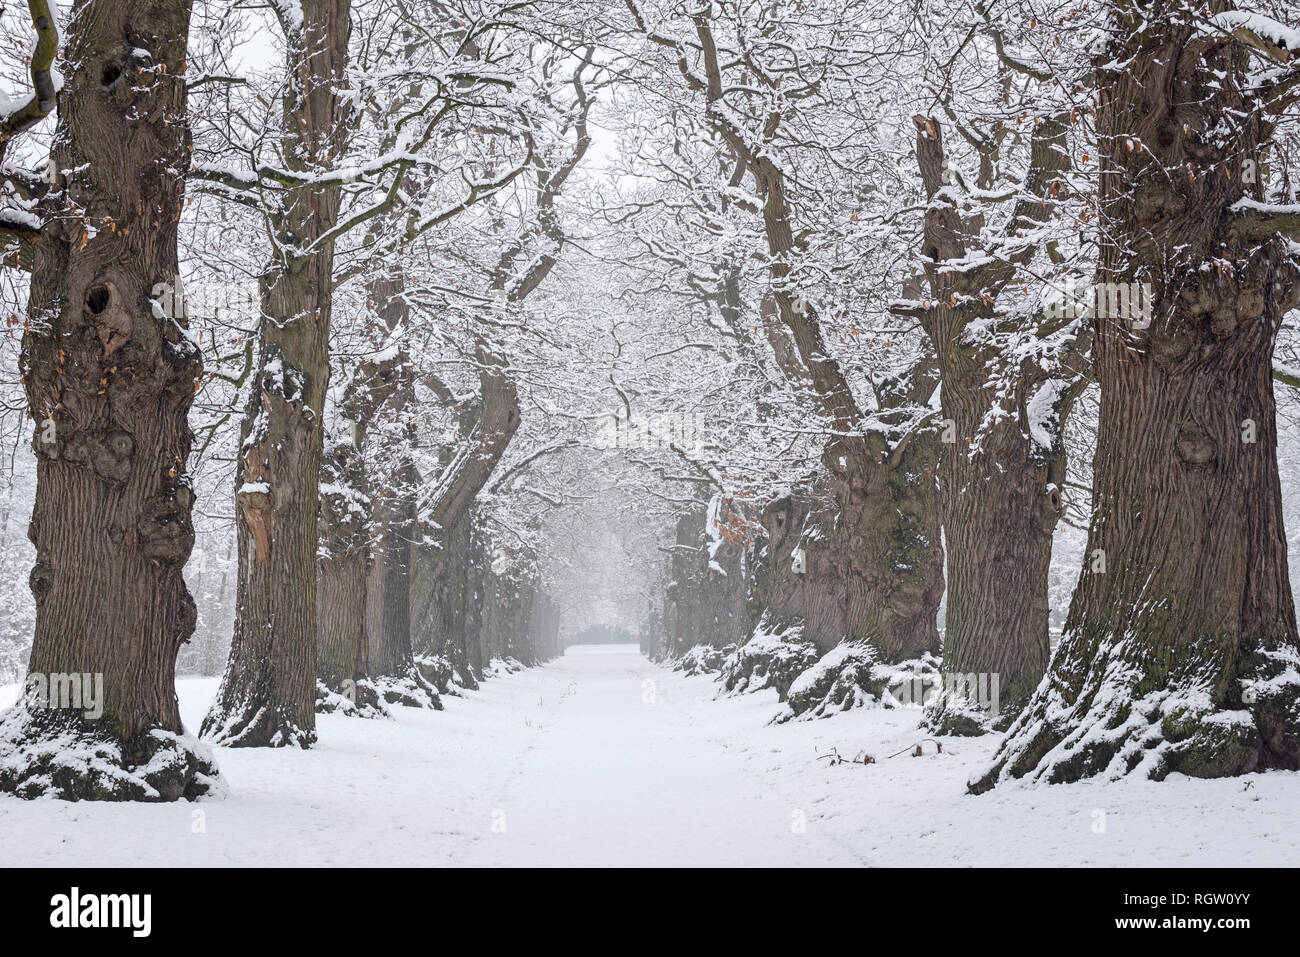 Country lane lined with 200 year old sweet chestnut trees (Castanea sativa) covered in snow during snowfall in winter Stock Photo